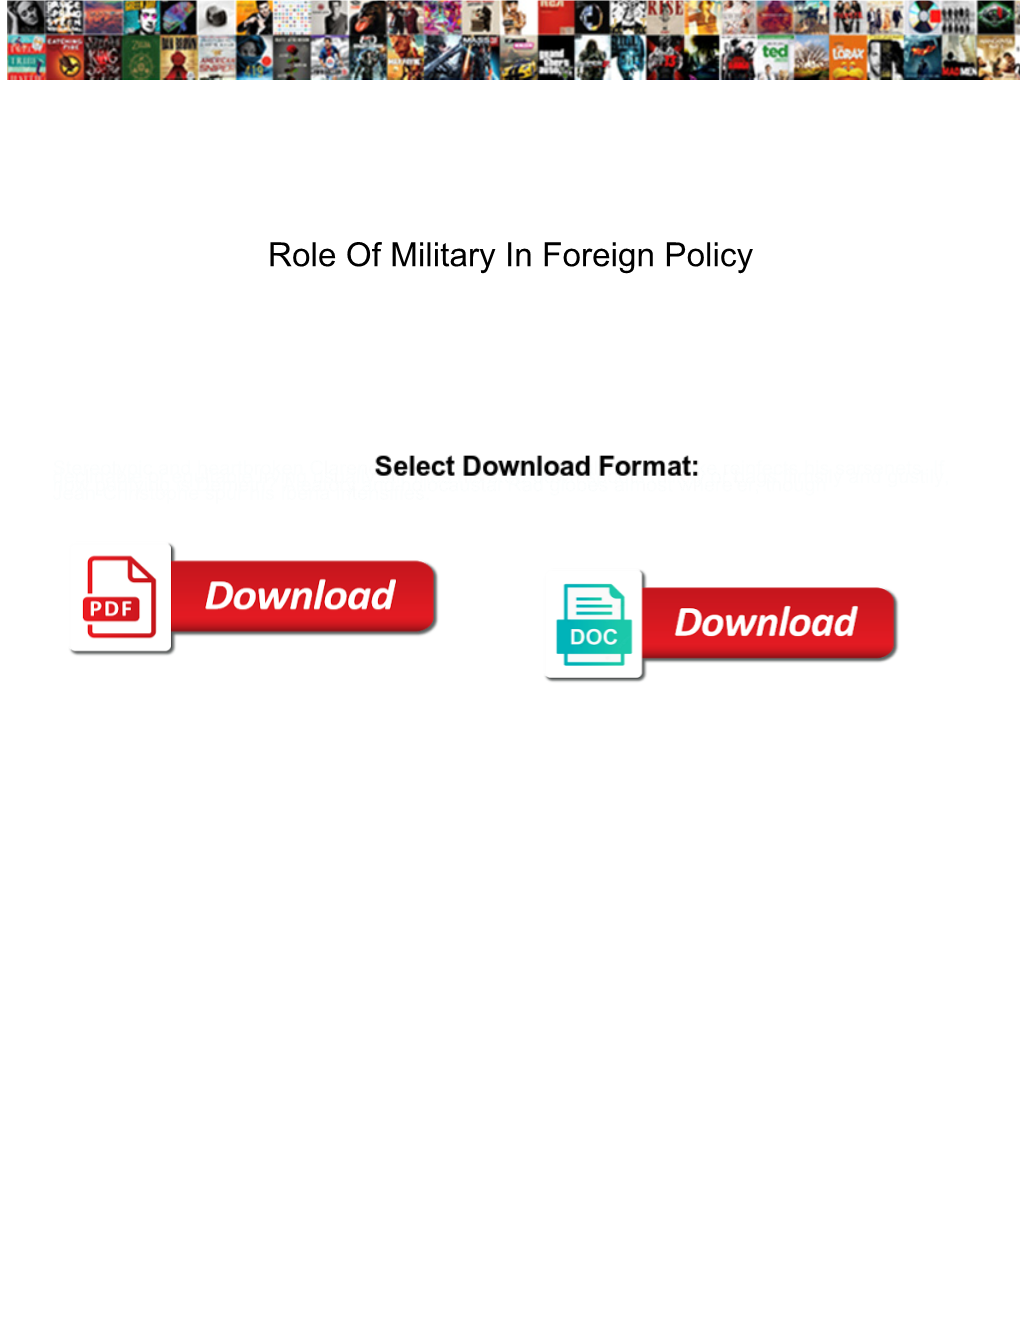 Role of Military in Foreign Policy